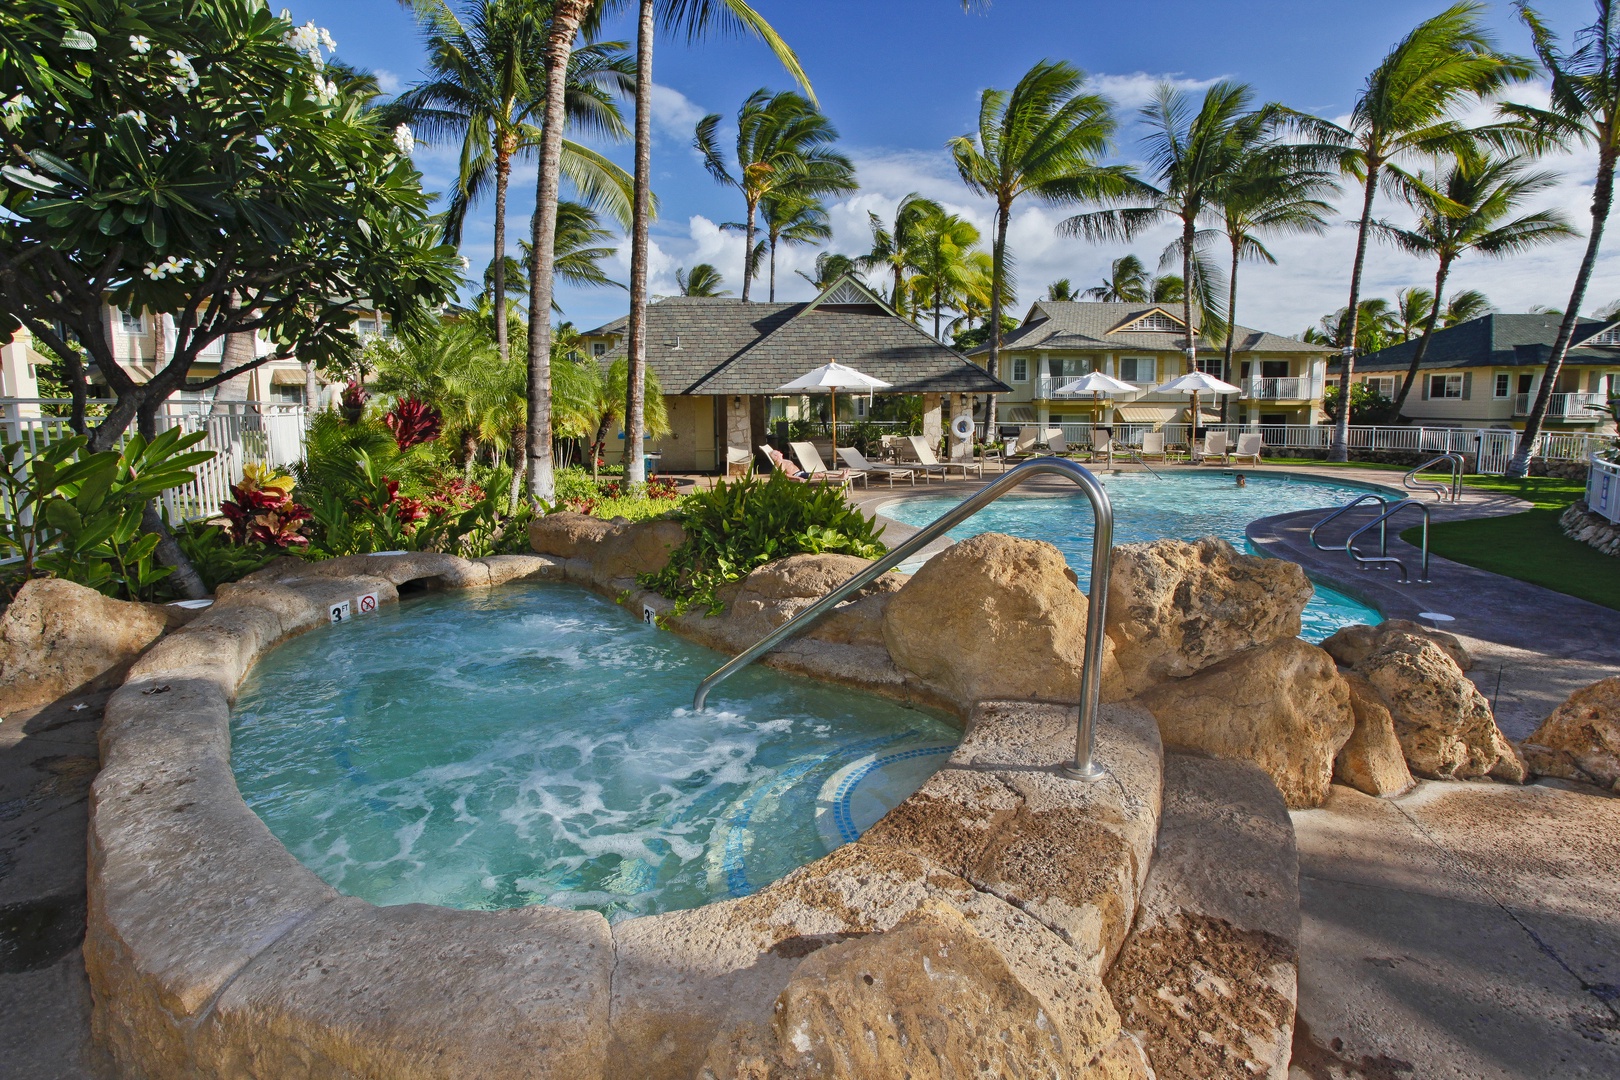 Kapolei Vacation Rentals, Kai Lani 16C - Relax in the hot tub in the center of the palm fringed landscape.